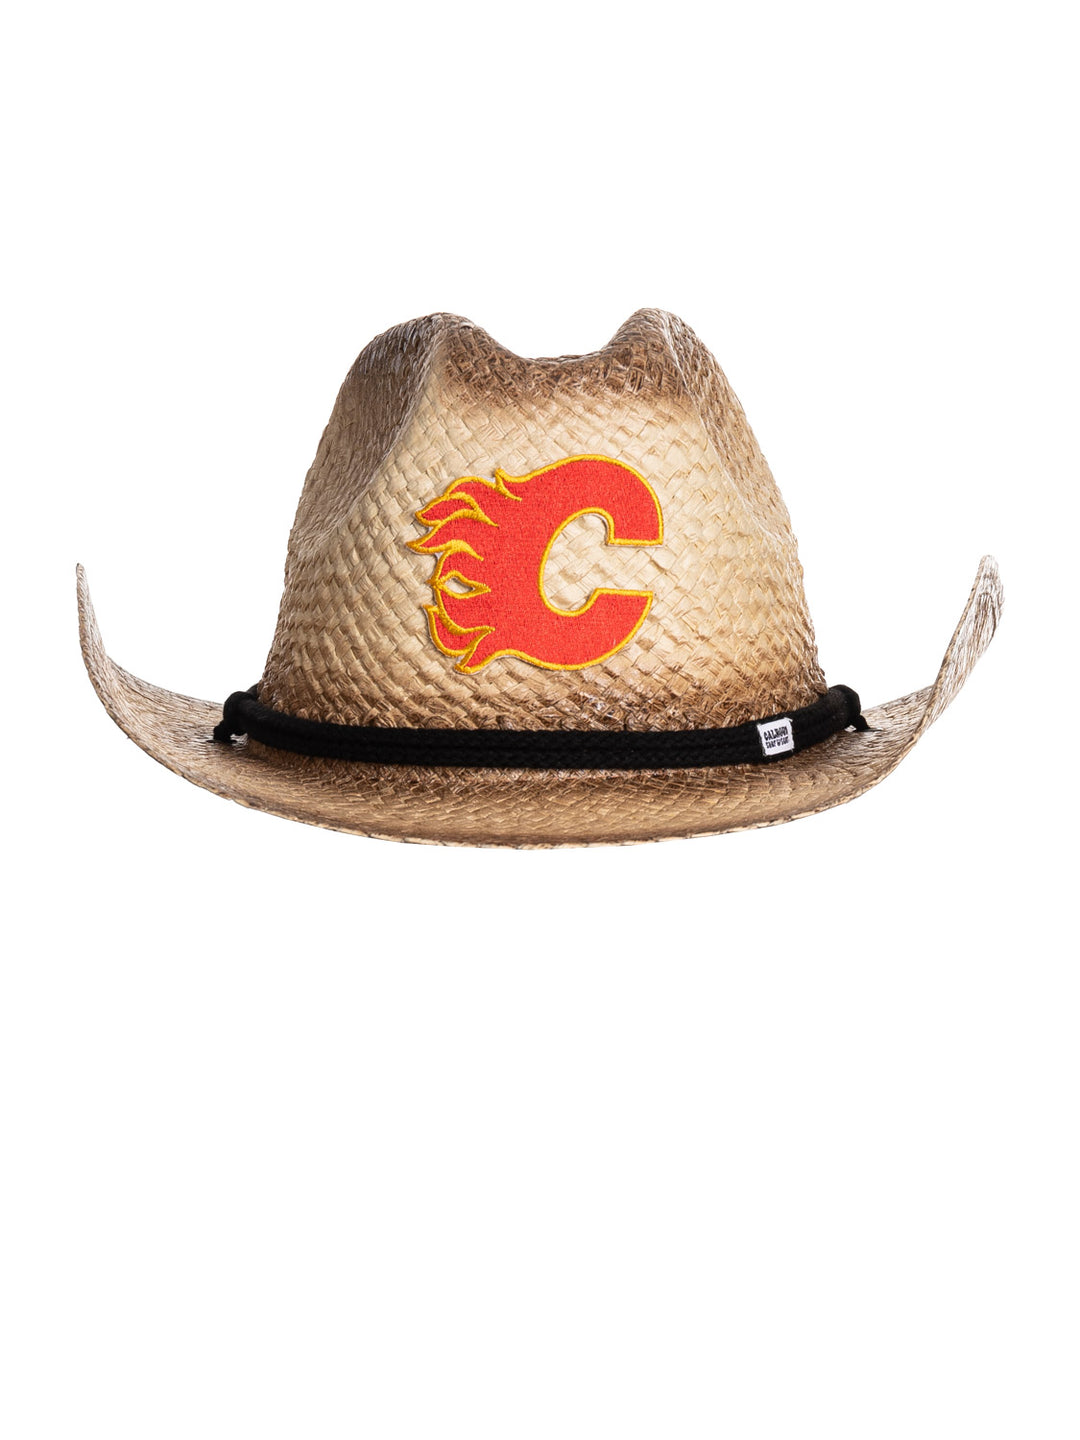 Official Licensed NHL Calgary Flames Cowboy Hat